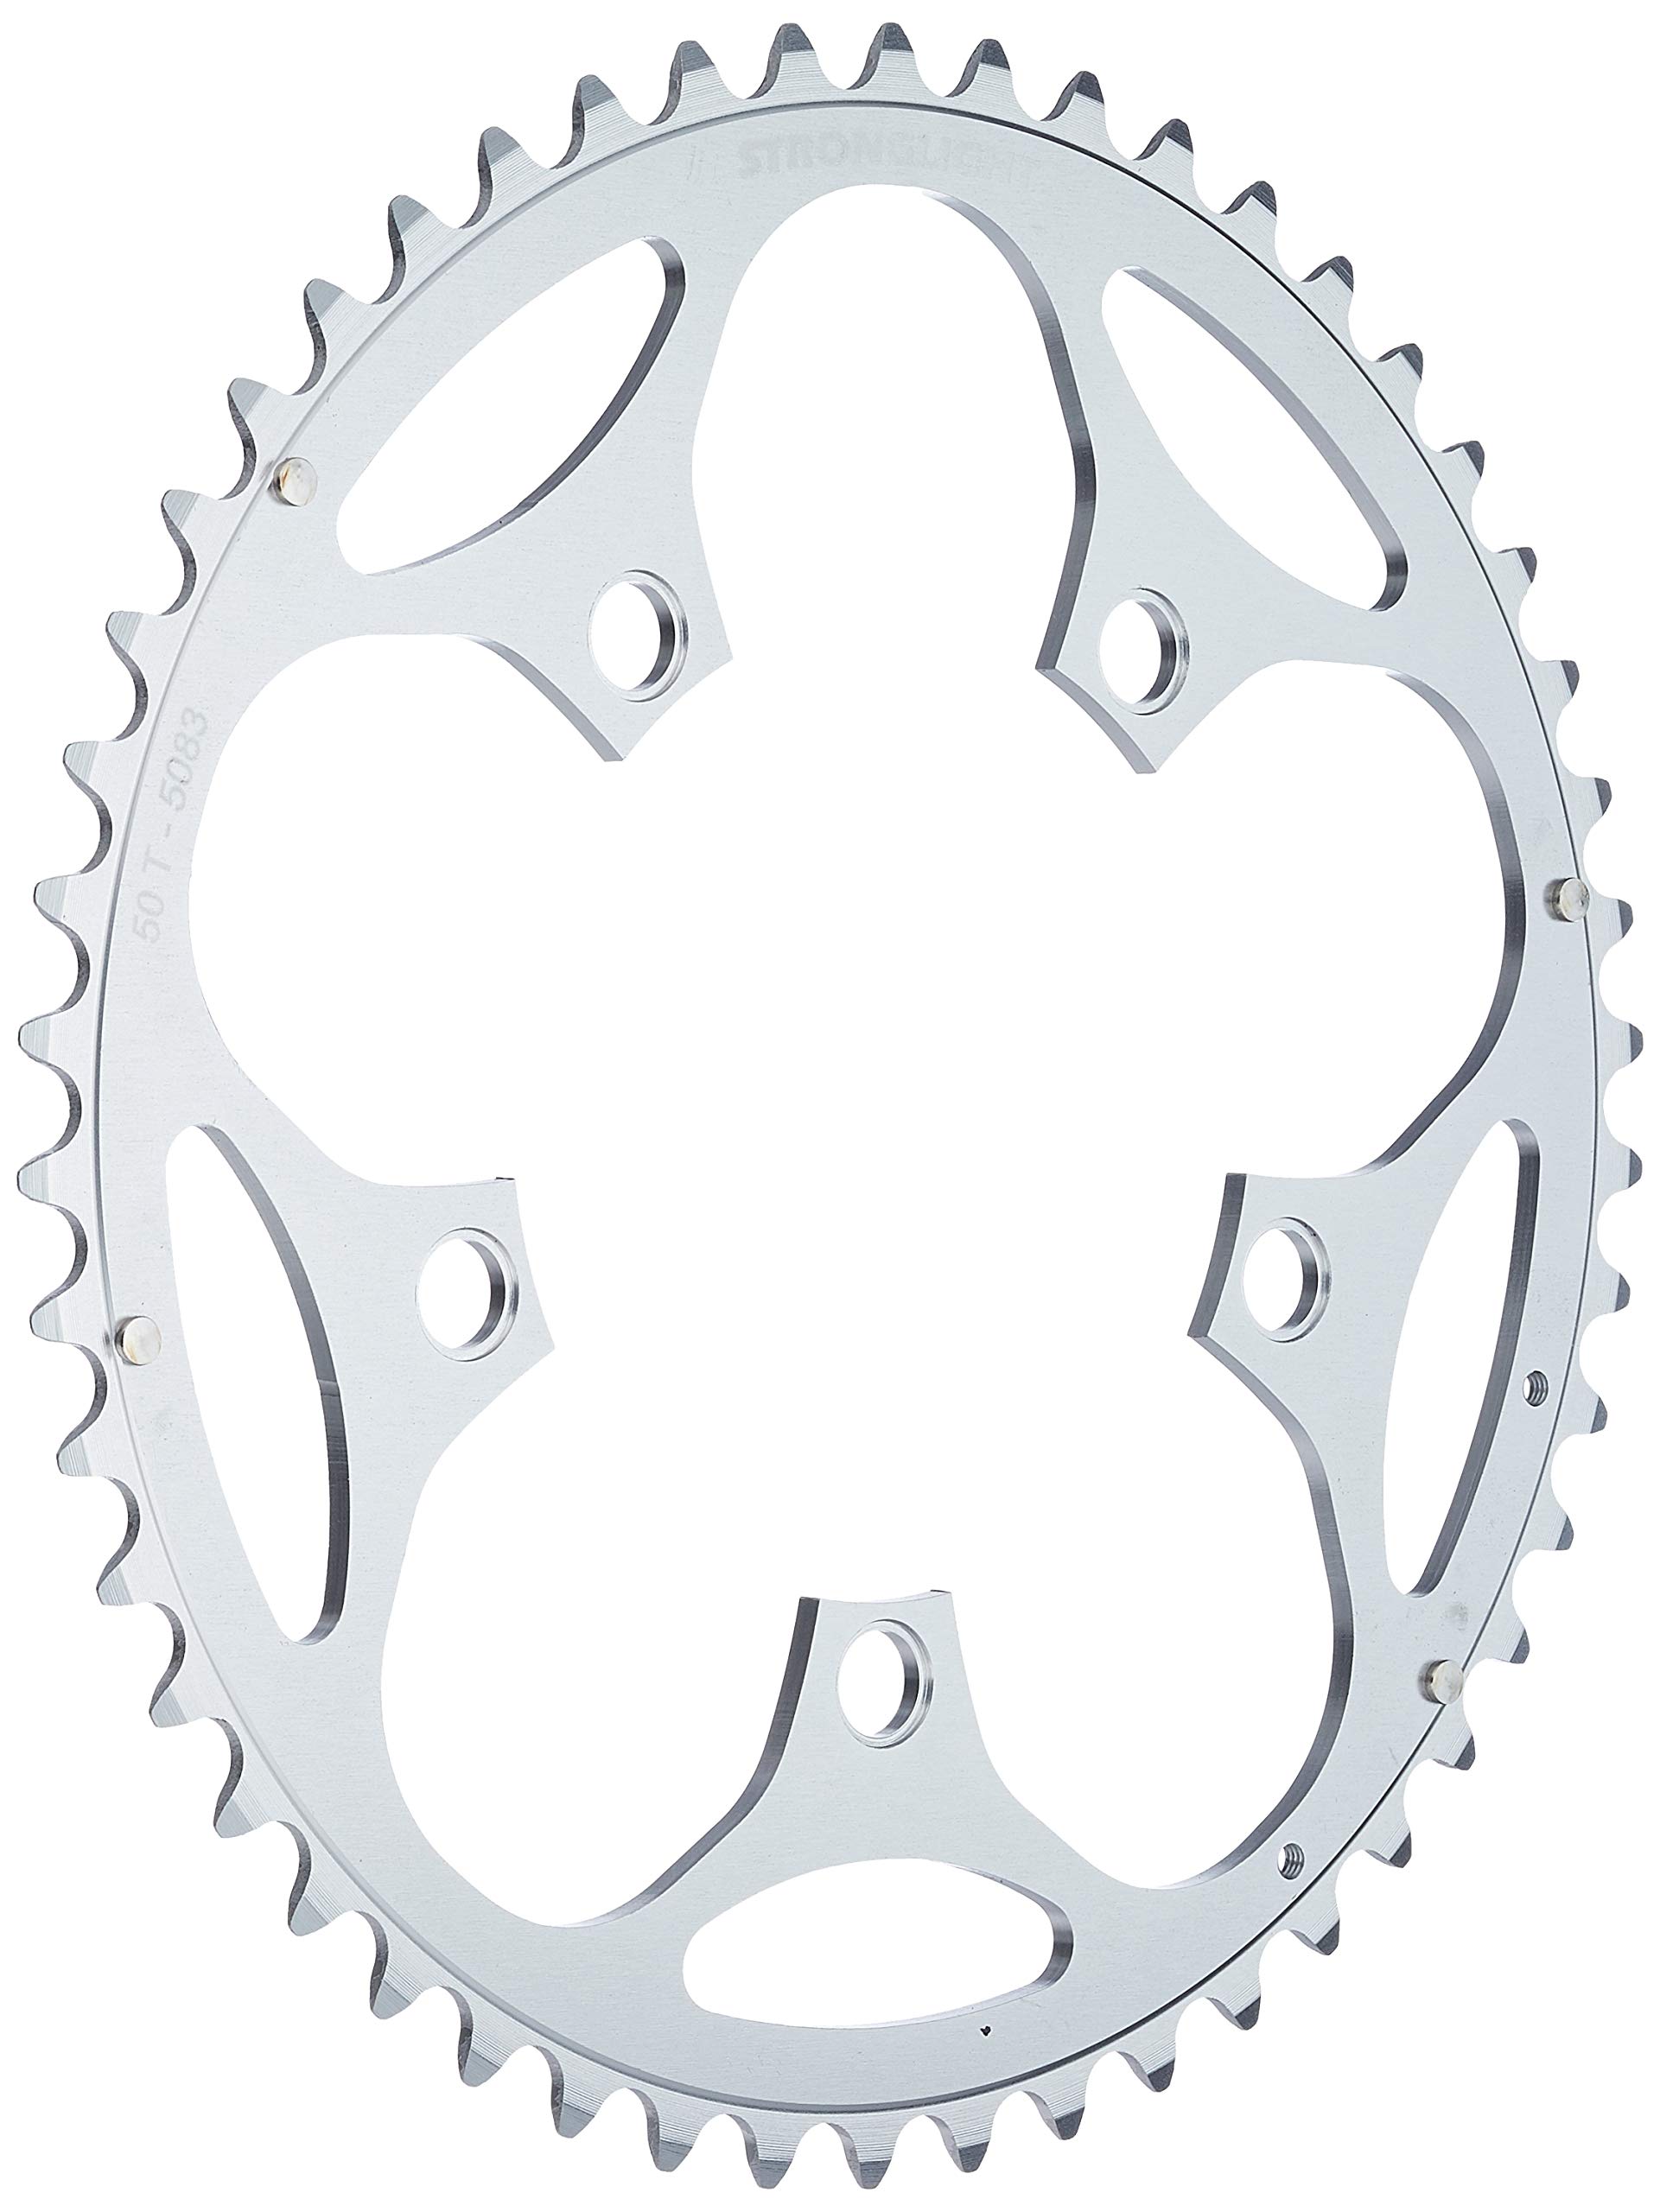 RD11039S Stronglight 39T Silver 5-Arm Alloy Chainring